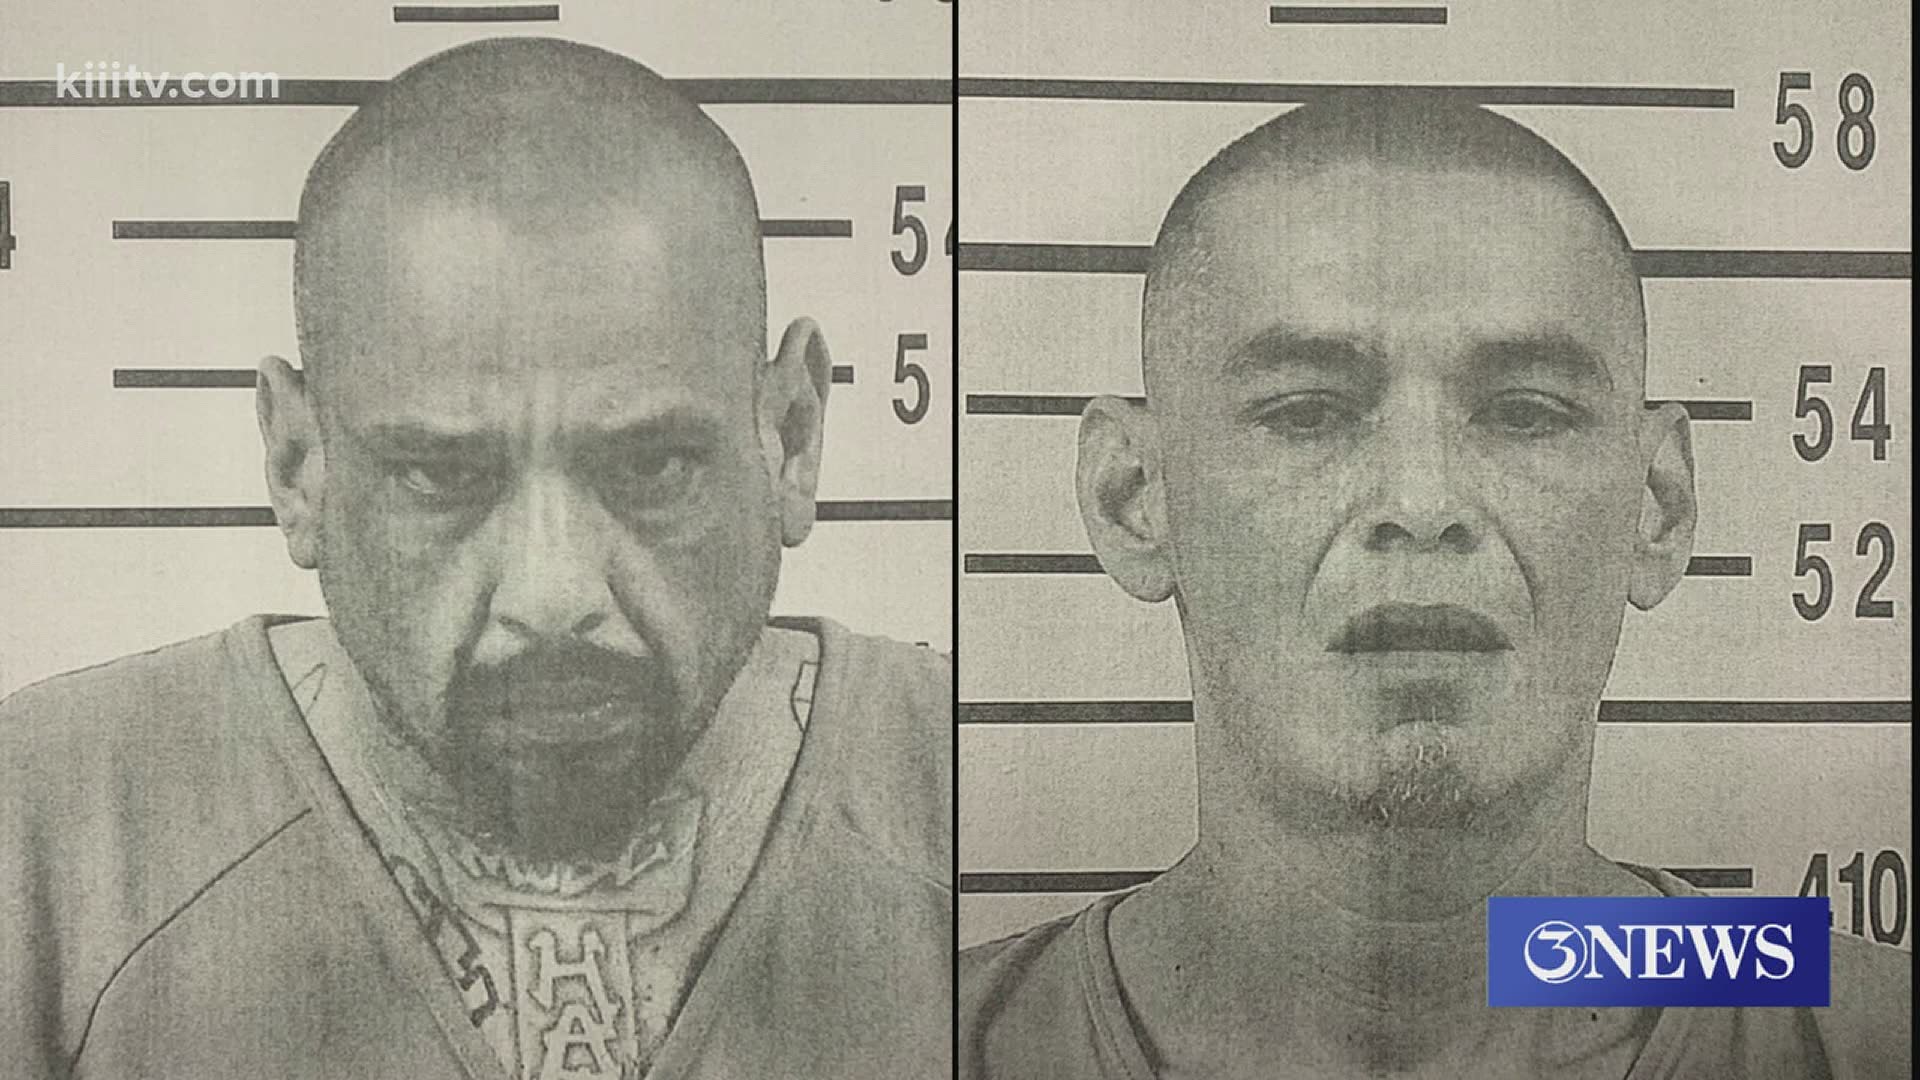 Two men were pulled over on a traffic violation in Kingsville. The two men were arrested and accused of being involved in the distribution of illegal drugs.